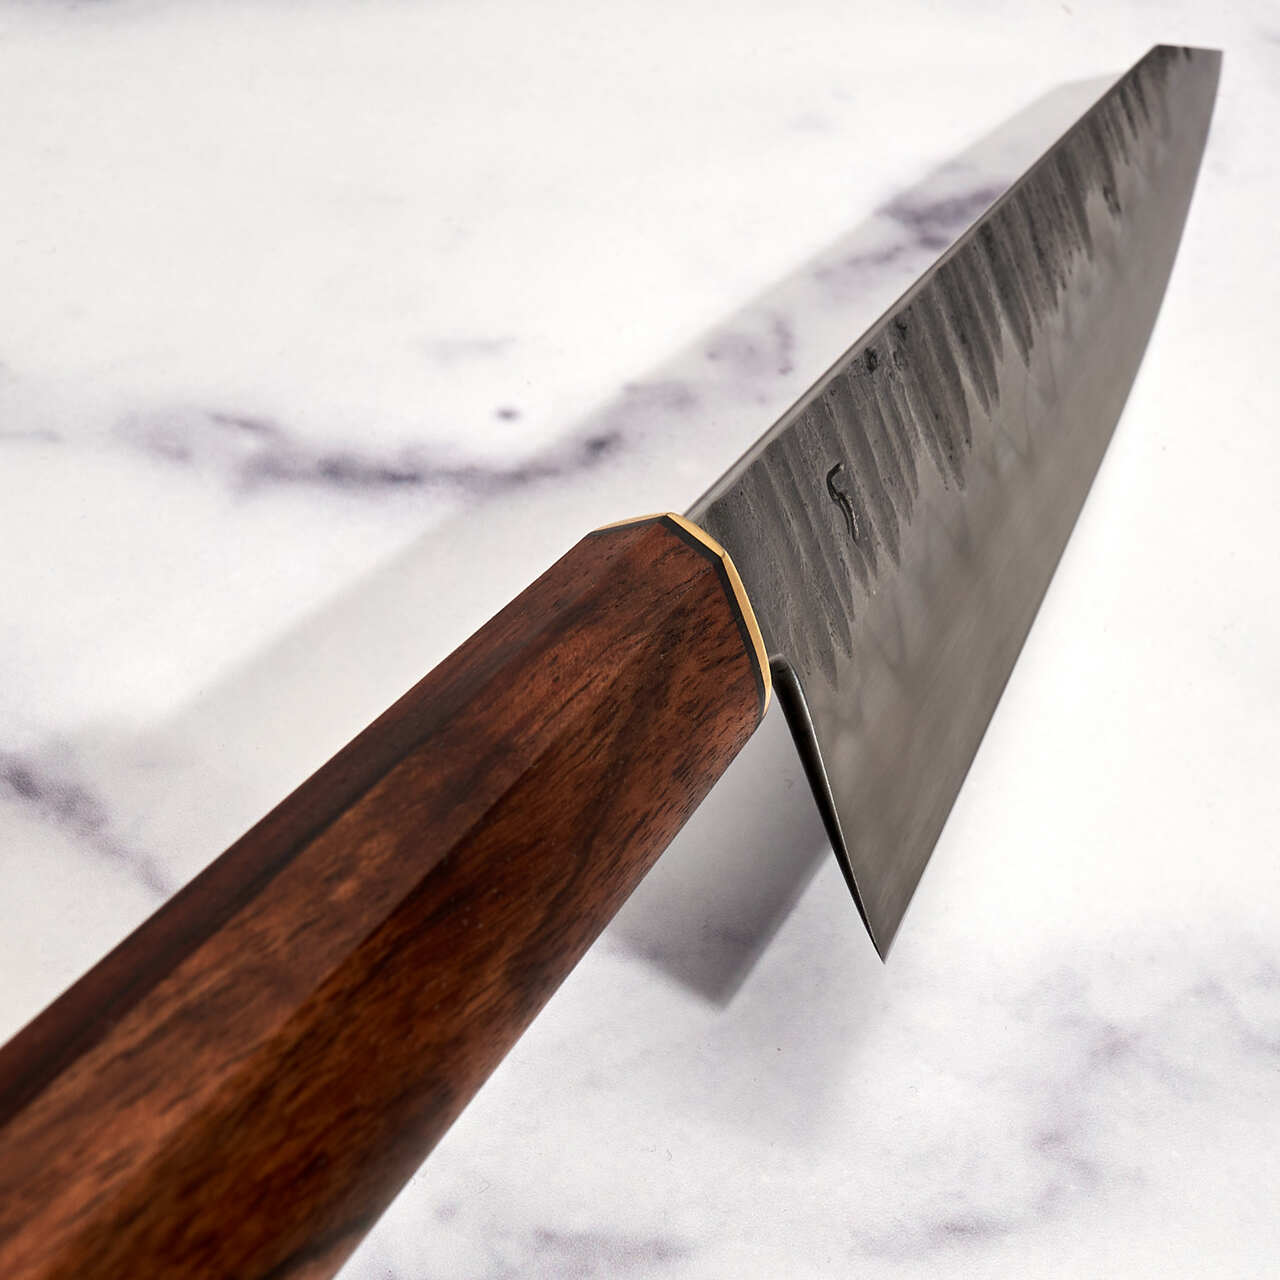 MCX K-Tip Gyuto 230mm 26c3 Limited Release by Fredrik Spåre - 2nd Edition - Handle